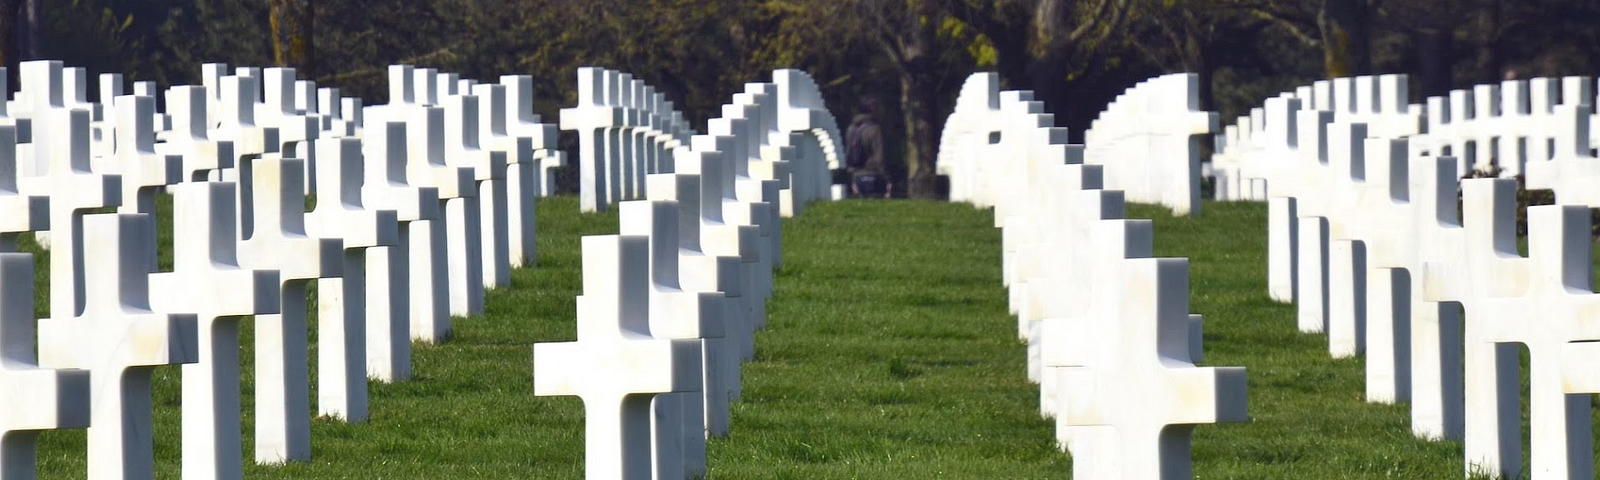 Graves at Normadie in France. American cemetery.